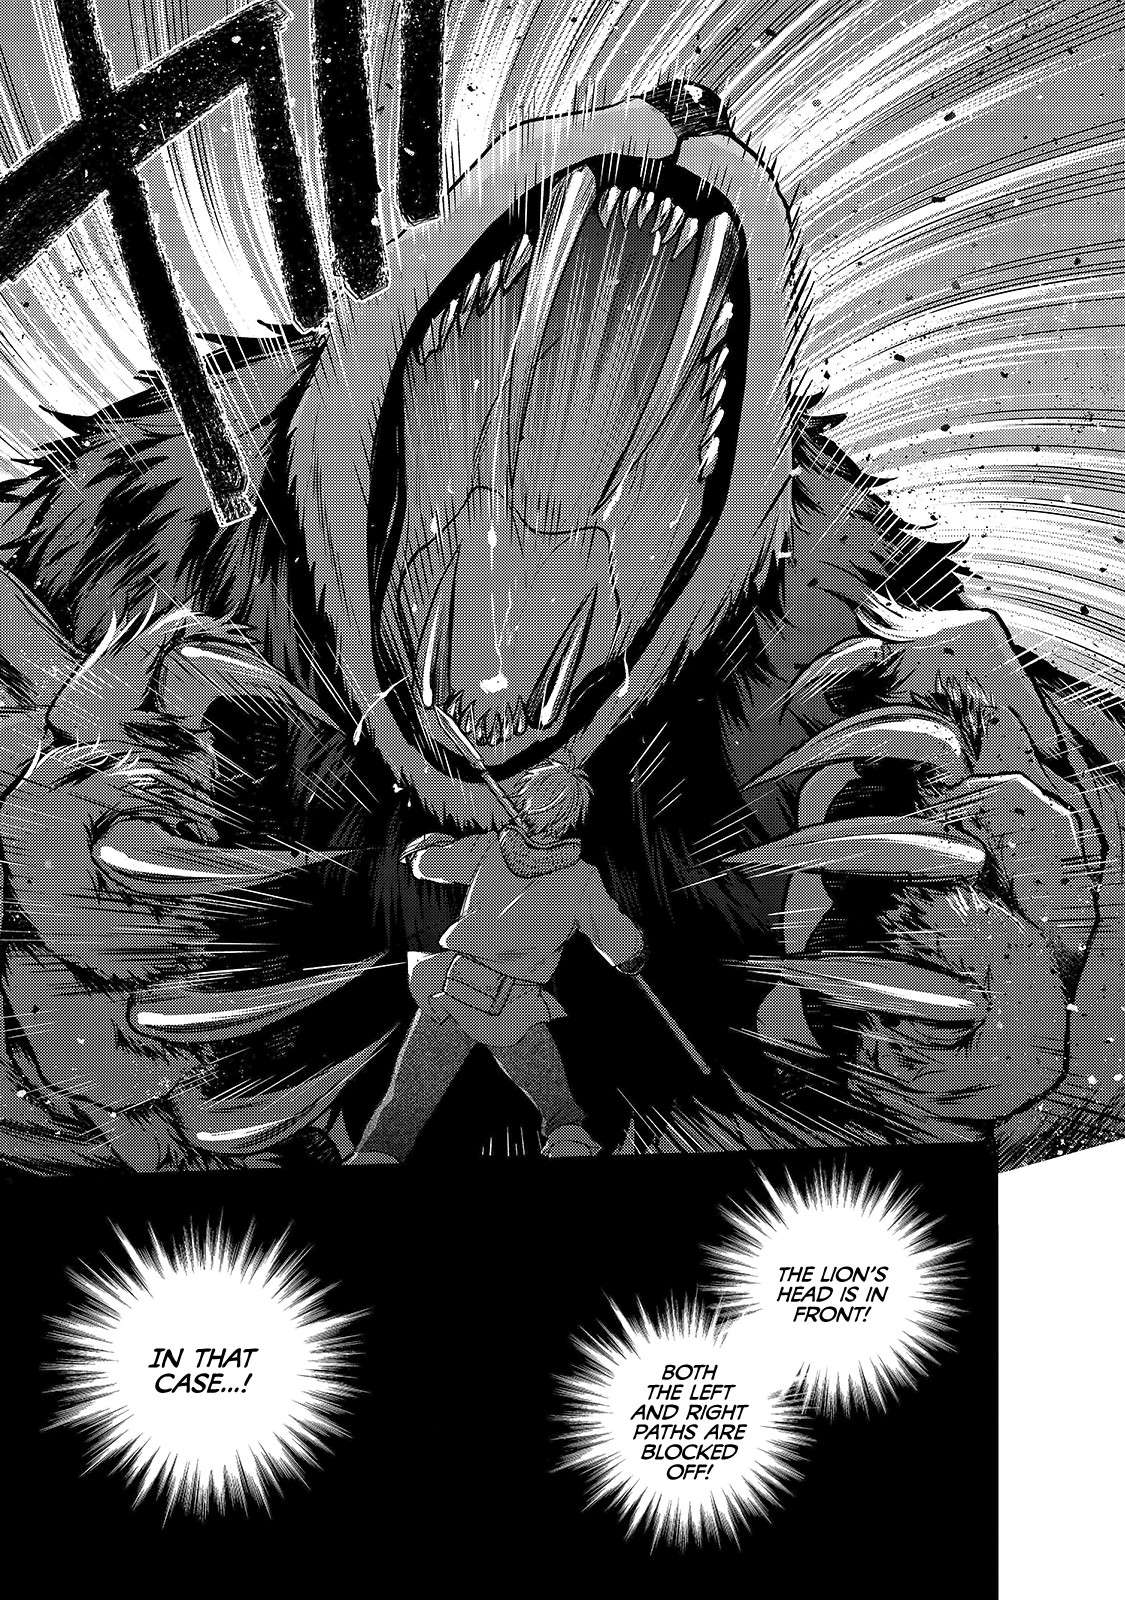 Saihate no Paladin Vol. 6 Ch. 27 The Battle's Climax